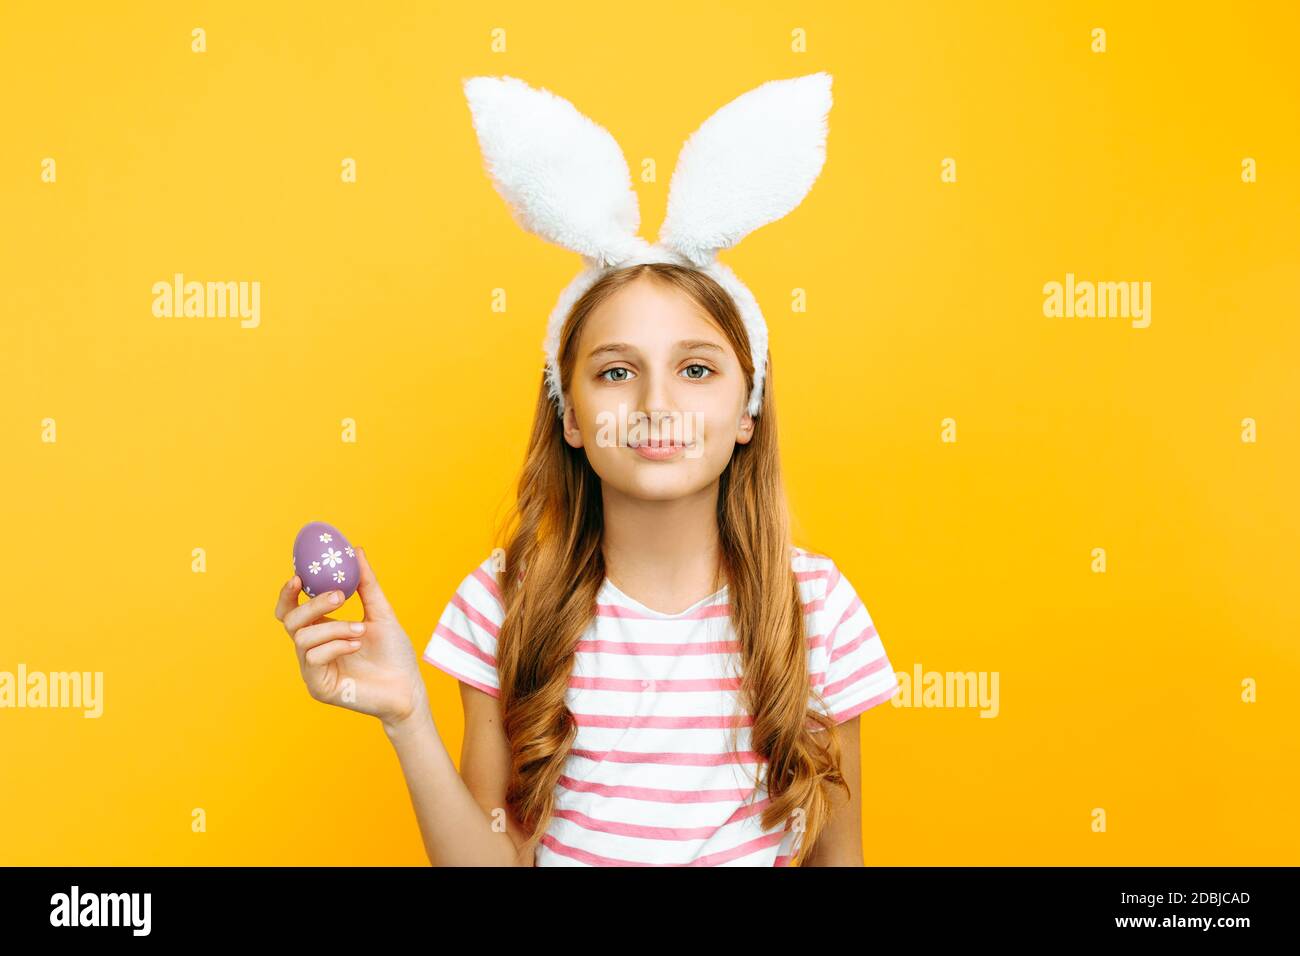 Beautiful happy girl on her head with rabbit ears and colorful Easter eggs in her hands, on a yellow background. Symbol of Easter and spring Stock Photo